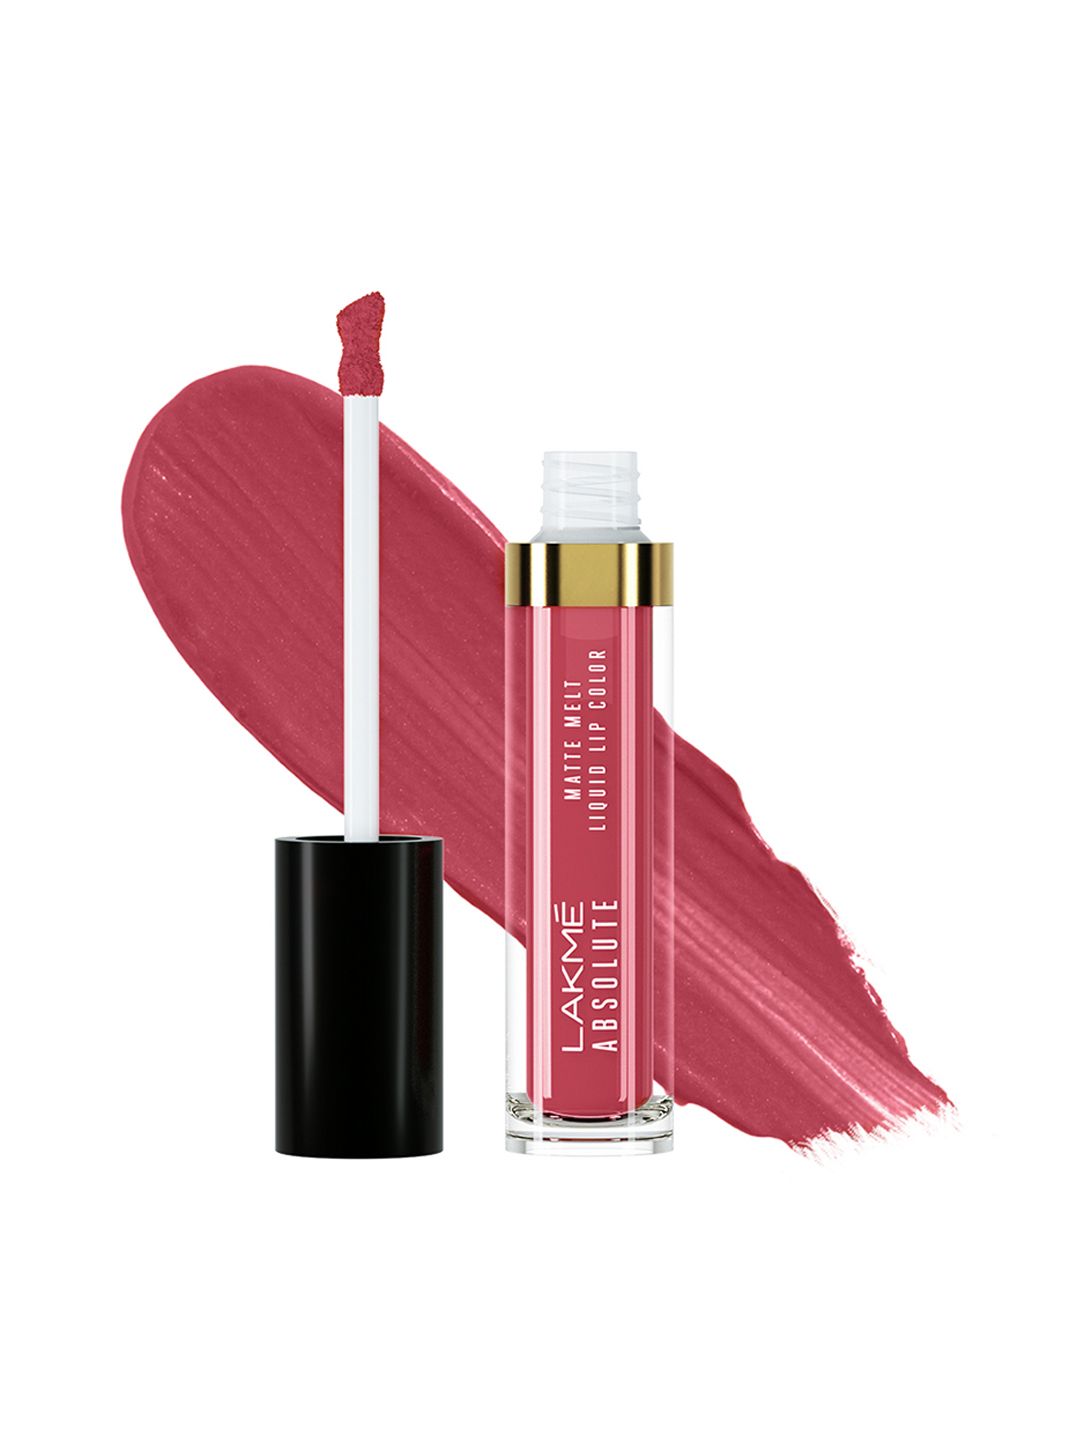 Lakme Absolute Matte Melt Liquid Lip Color -Pink Drama 230 Price in India